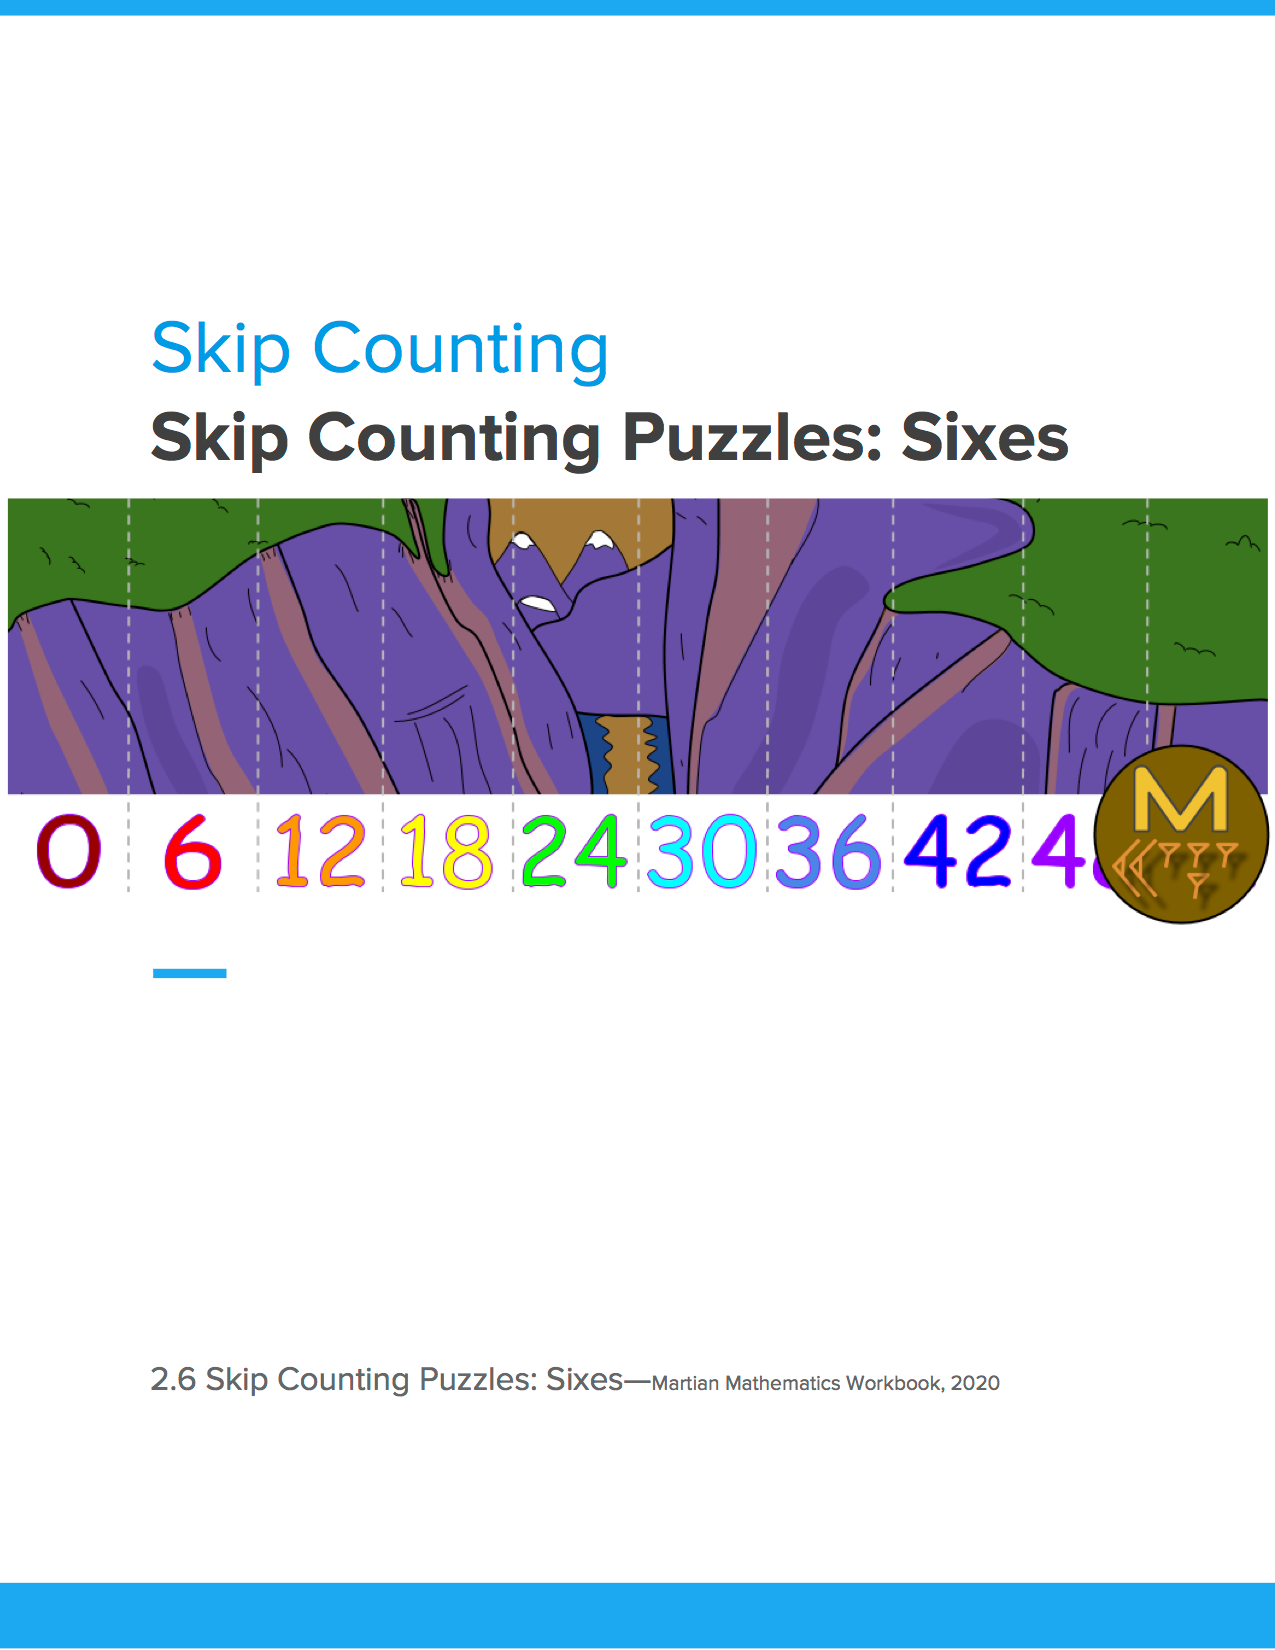 Skip Counting Puzzles: Sixes